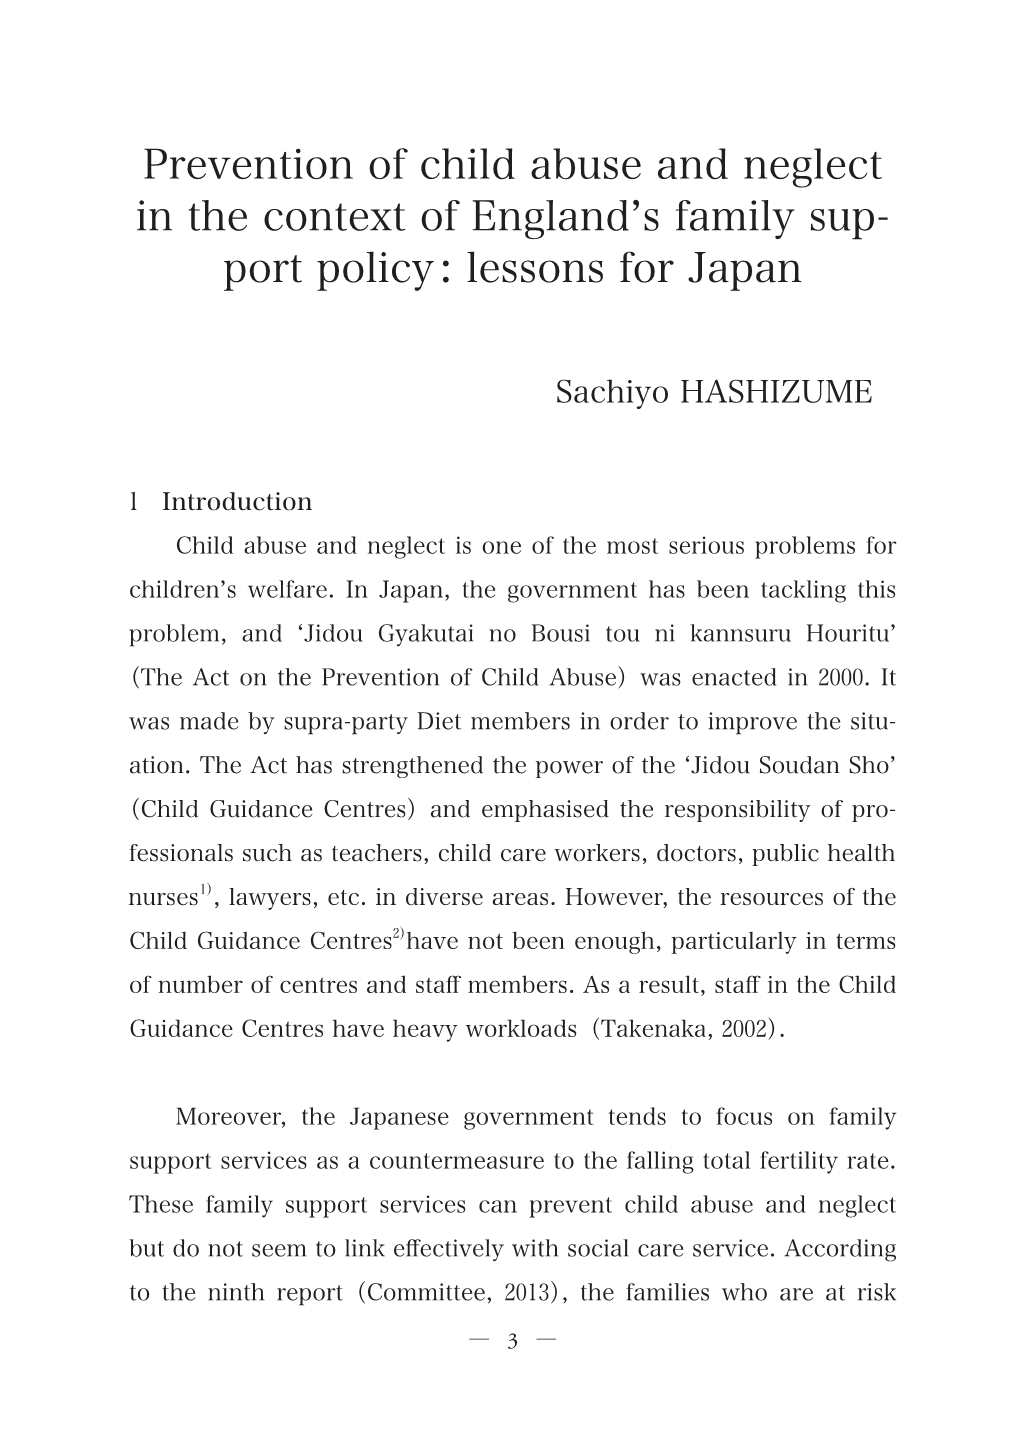 Prevention of Child Abuse and Neglect in the Context of Englandʼs Family Sup- Port Policy: Lessons for Japan